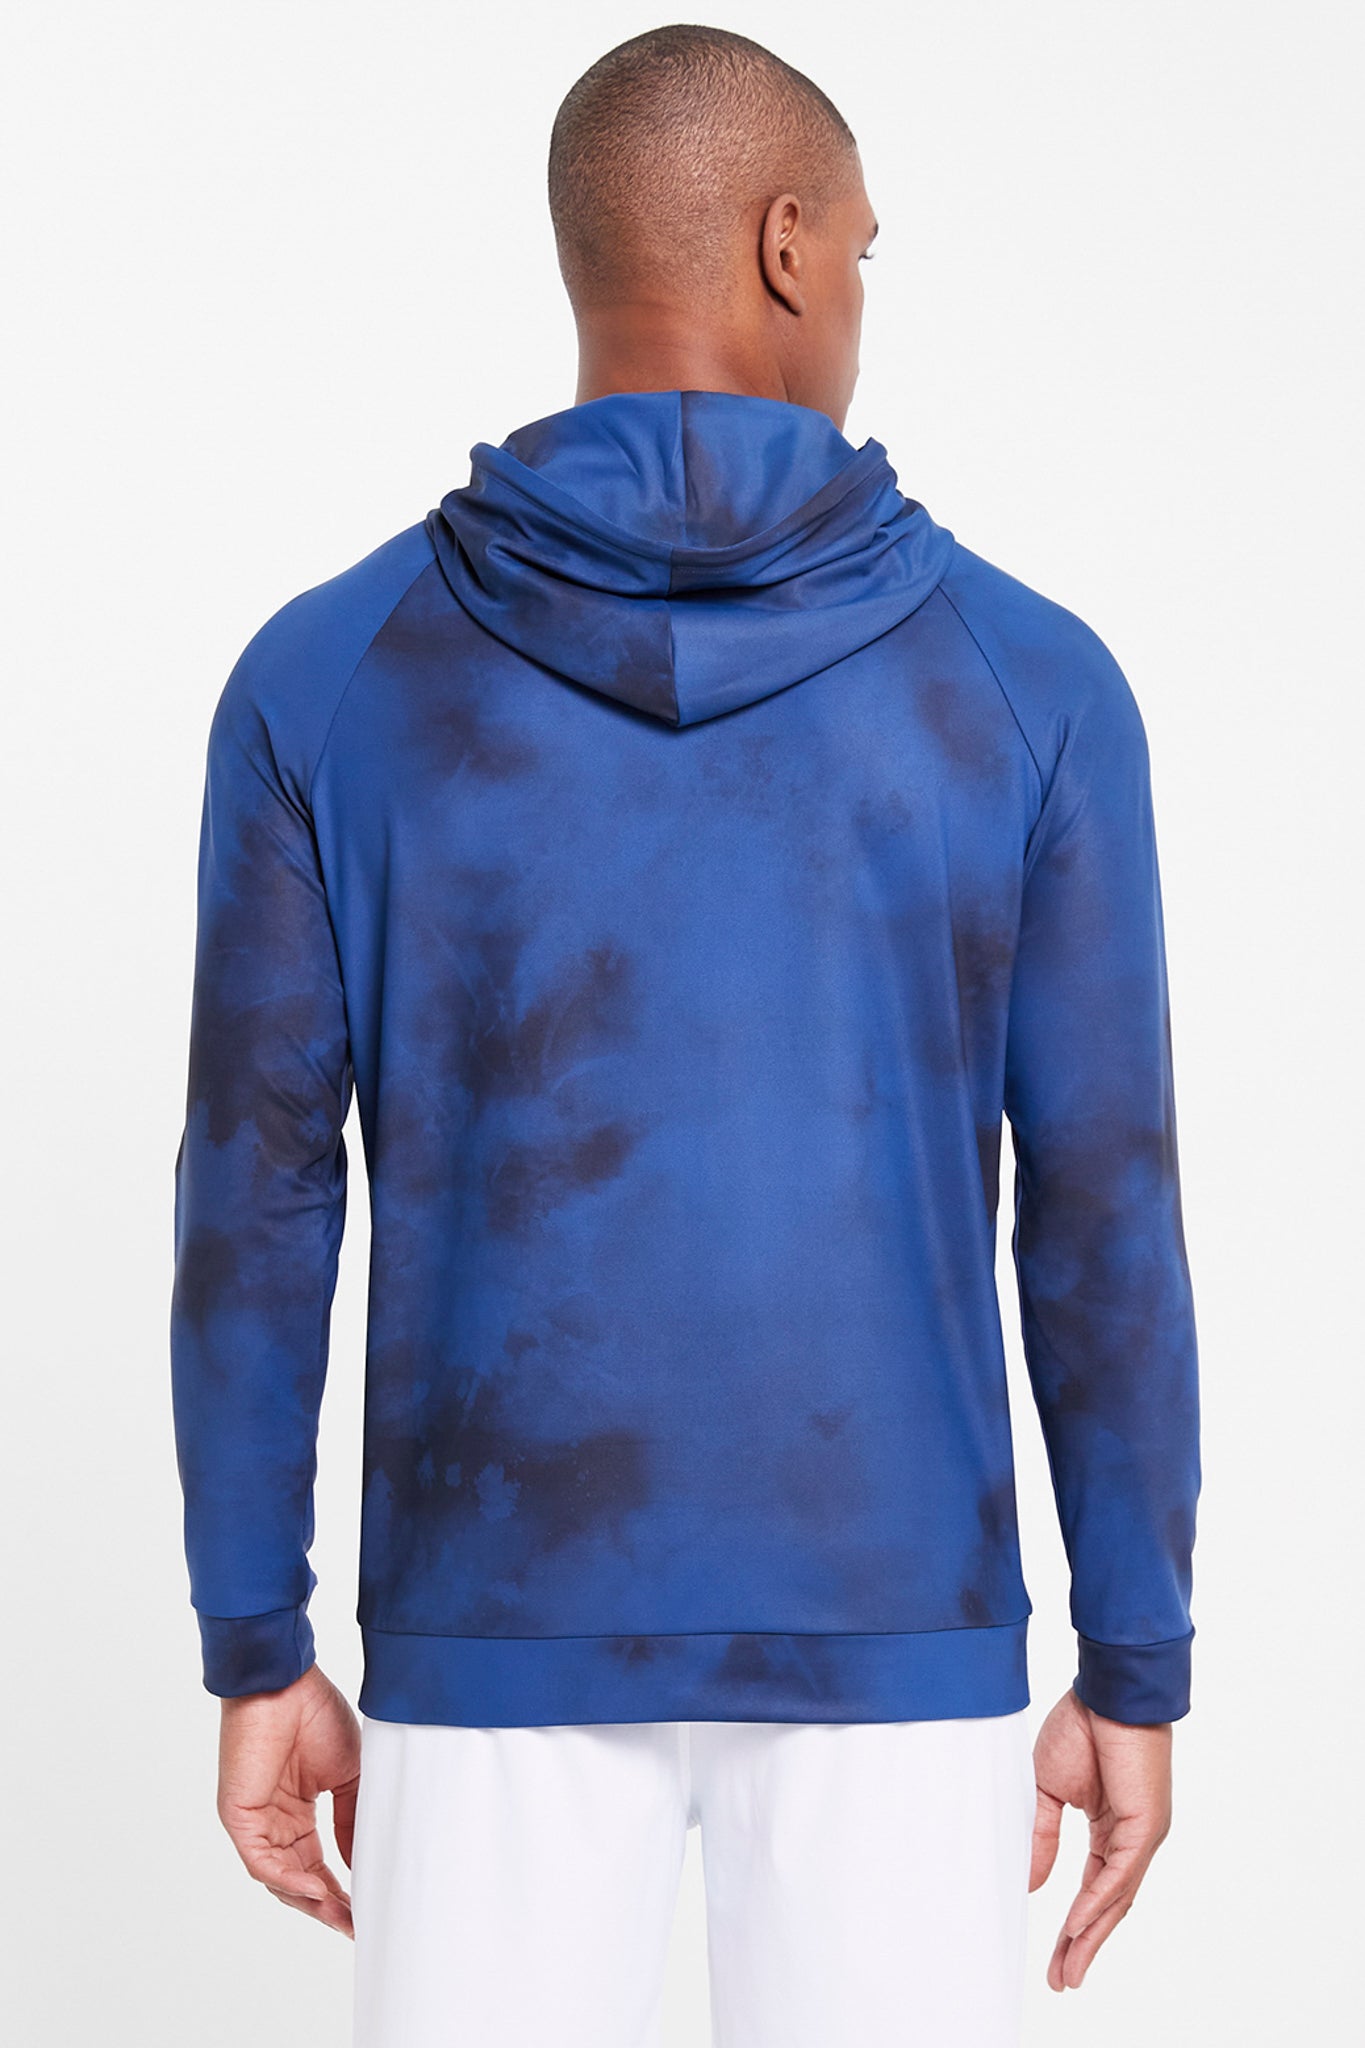 Image of the hicks hoodie in classic blue